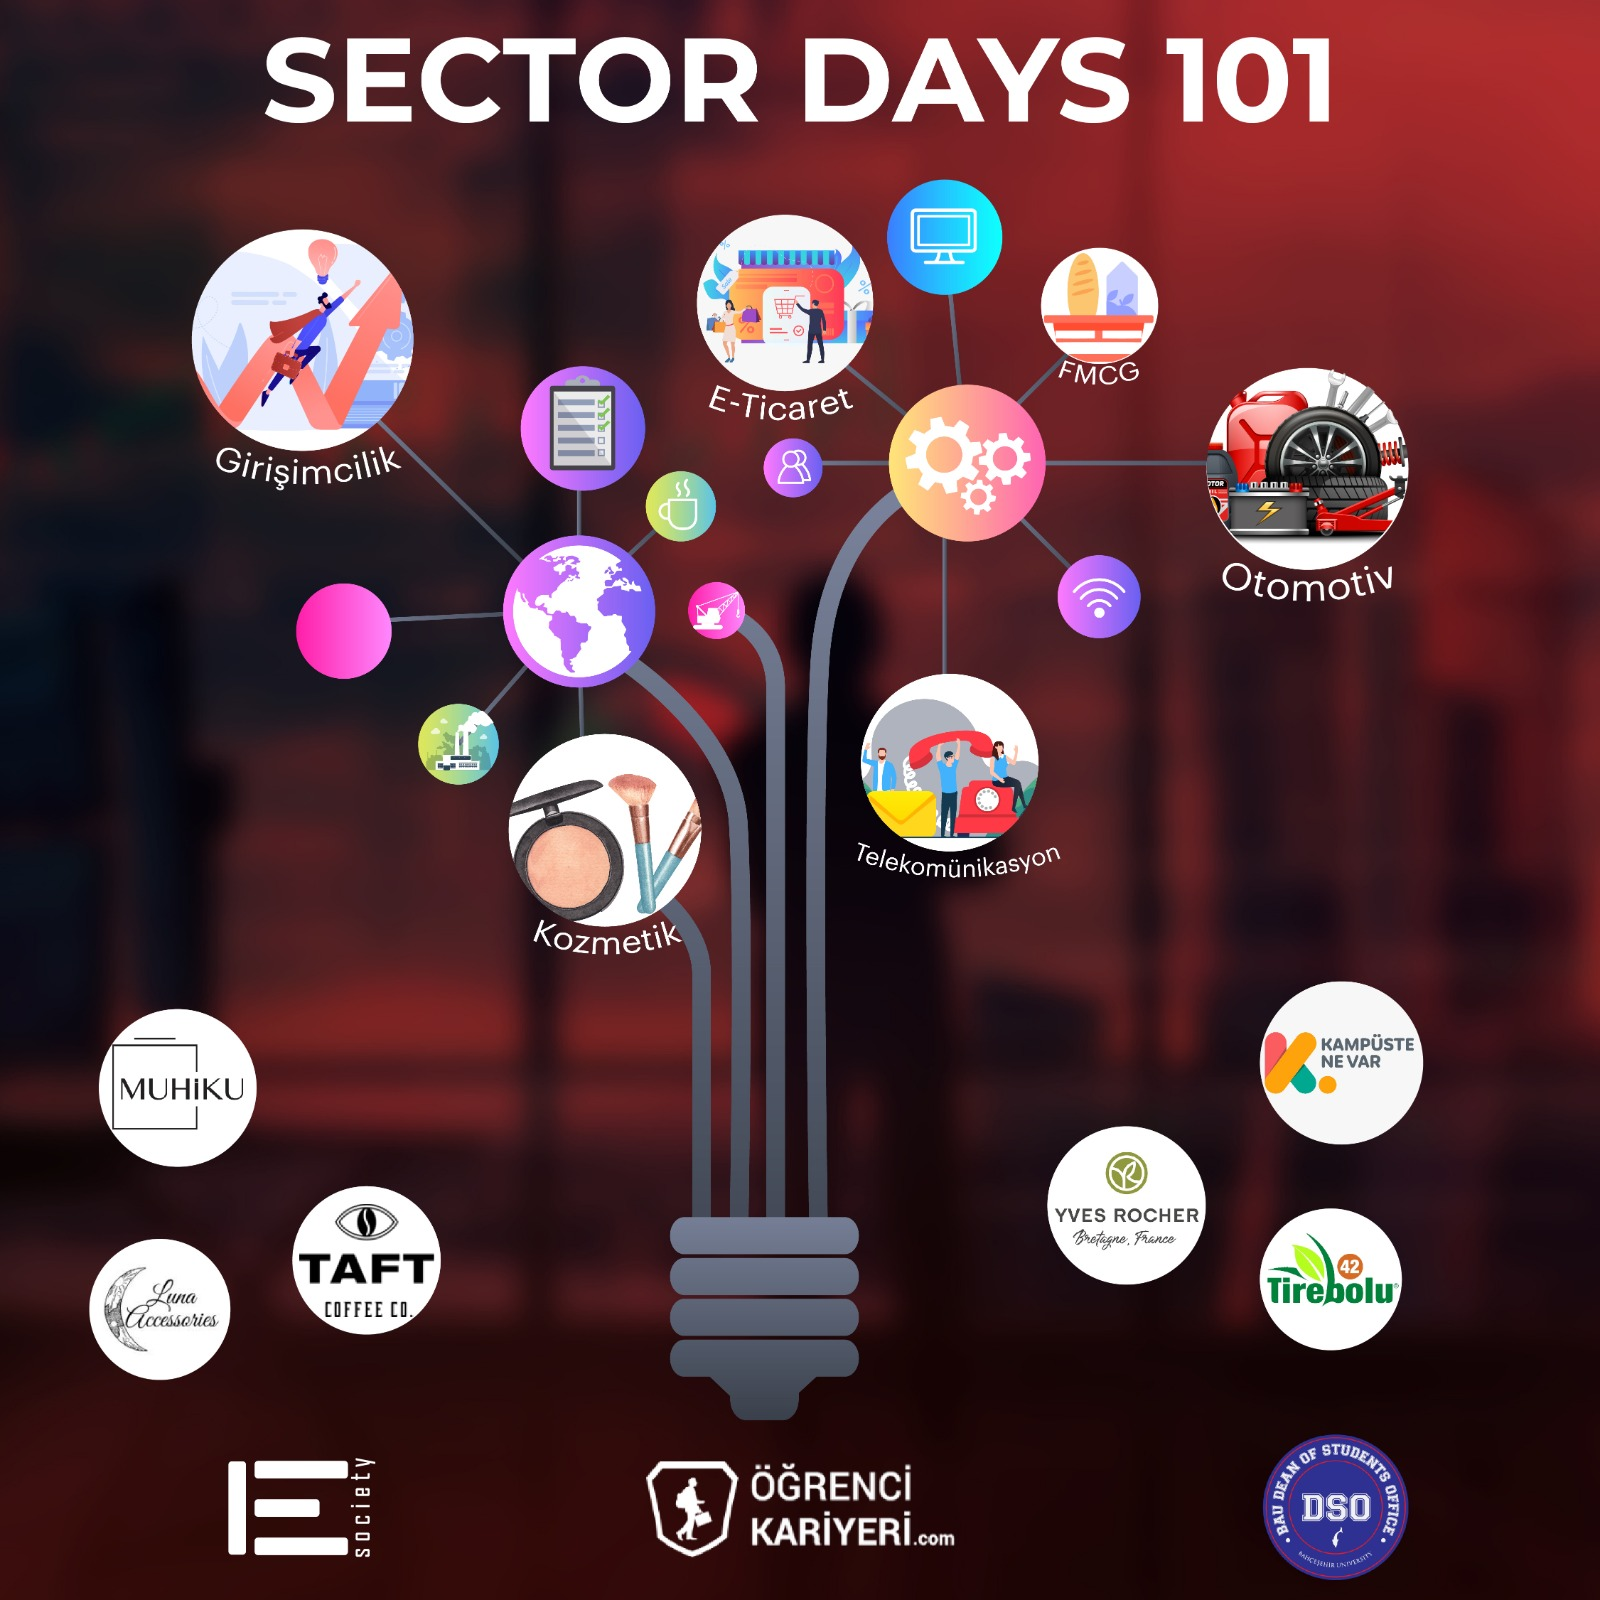 Sector Days 101